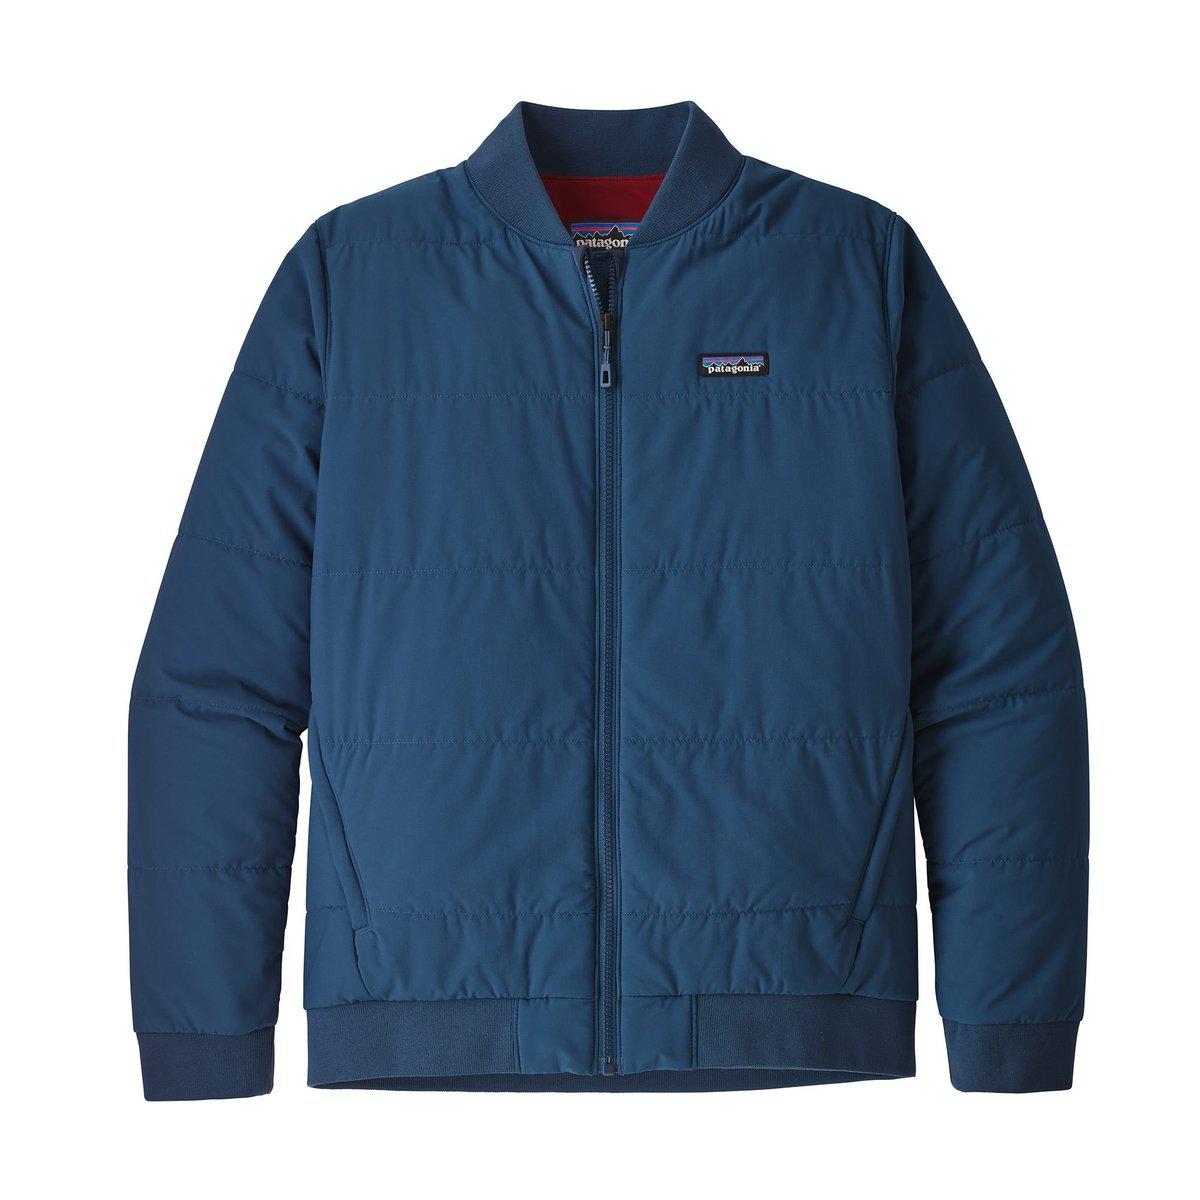 Patagonia Synthetic Zemer Bomber Jacket in Stone Blue (Blue) for Men - Lyst